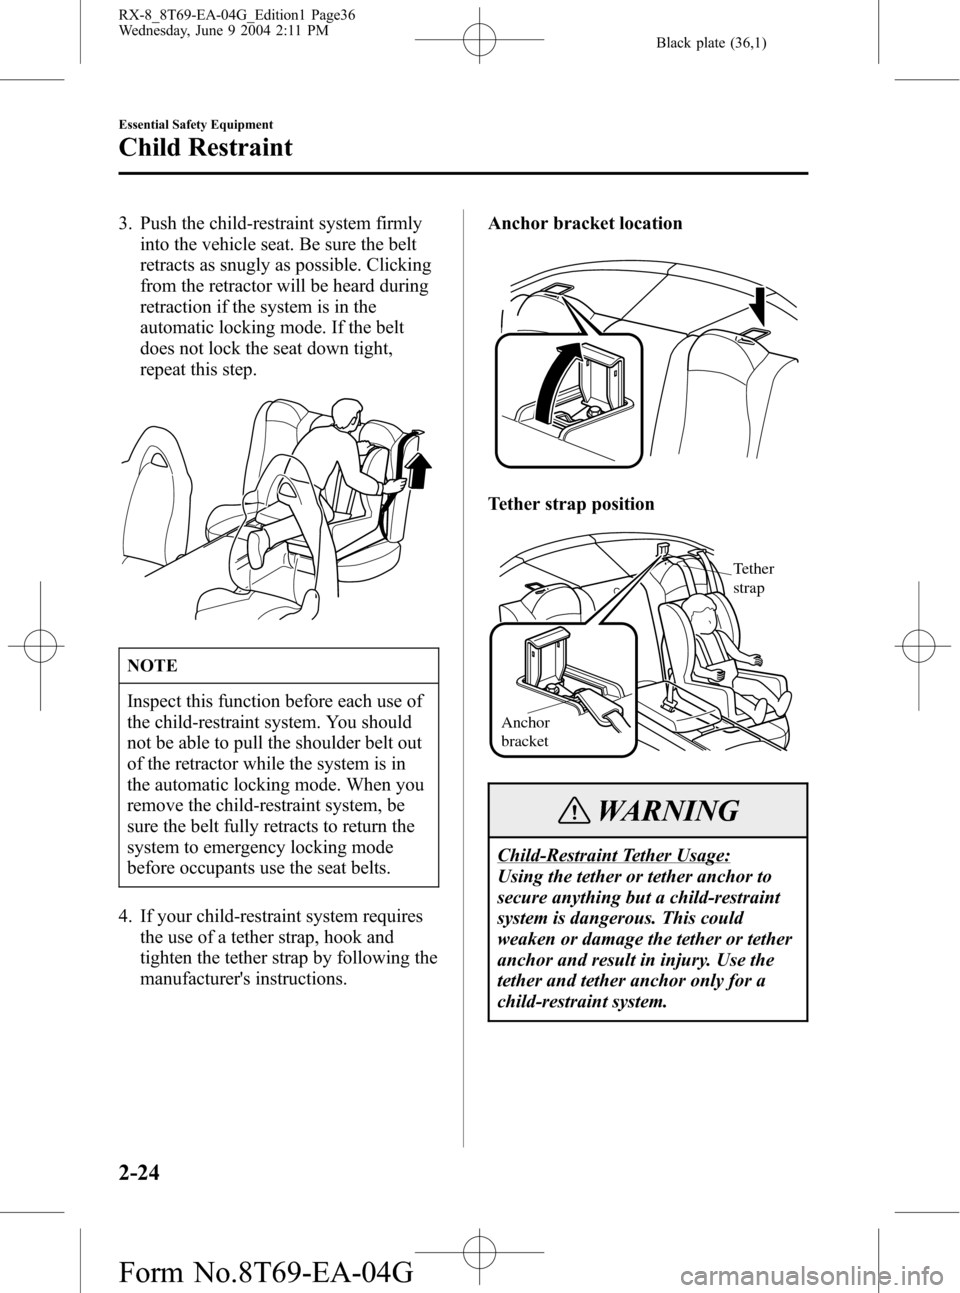 MAZDA MODEL RX 8 2005  Owners Manual (in English) Black plate (36,1)
3. Push the child-restraint system firmly
into the vehicle seat. Be sure the belt
retracts as snugly as possible. Clicking
from the retractor will be heard during
retraction if the 